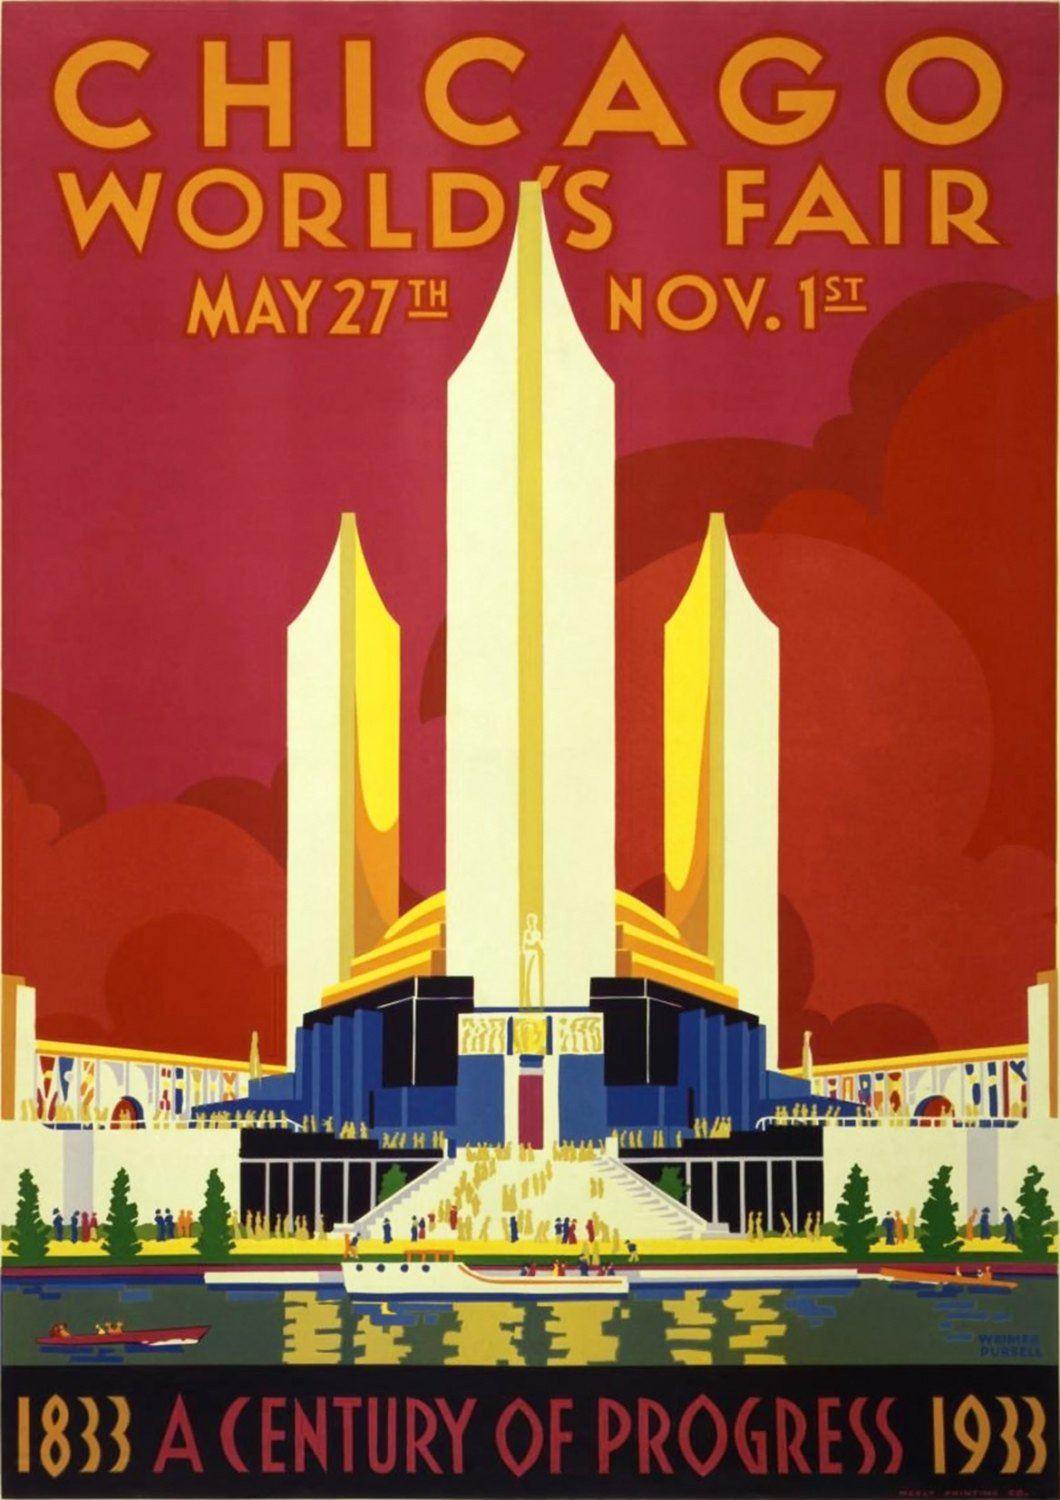 CHICAGO TRAVEL POSTER: Red American World's Fair Advert - Pimlico Prints